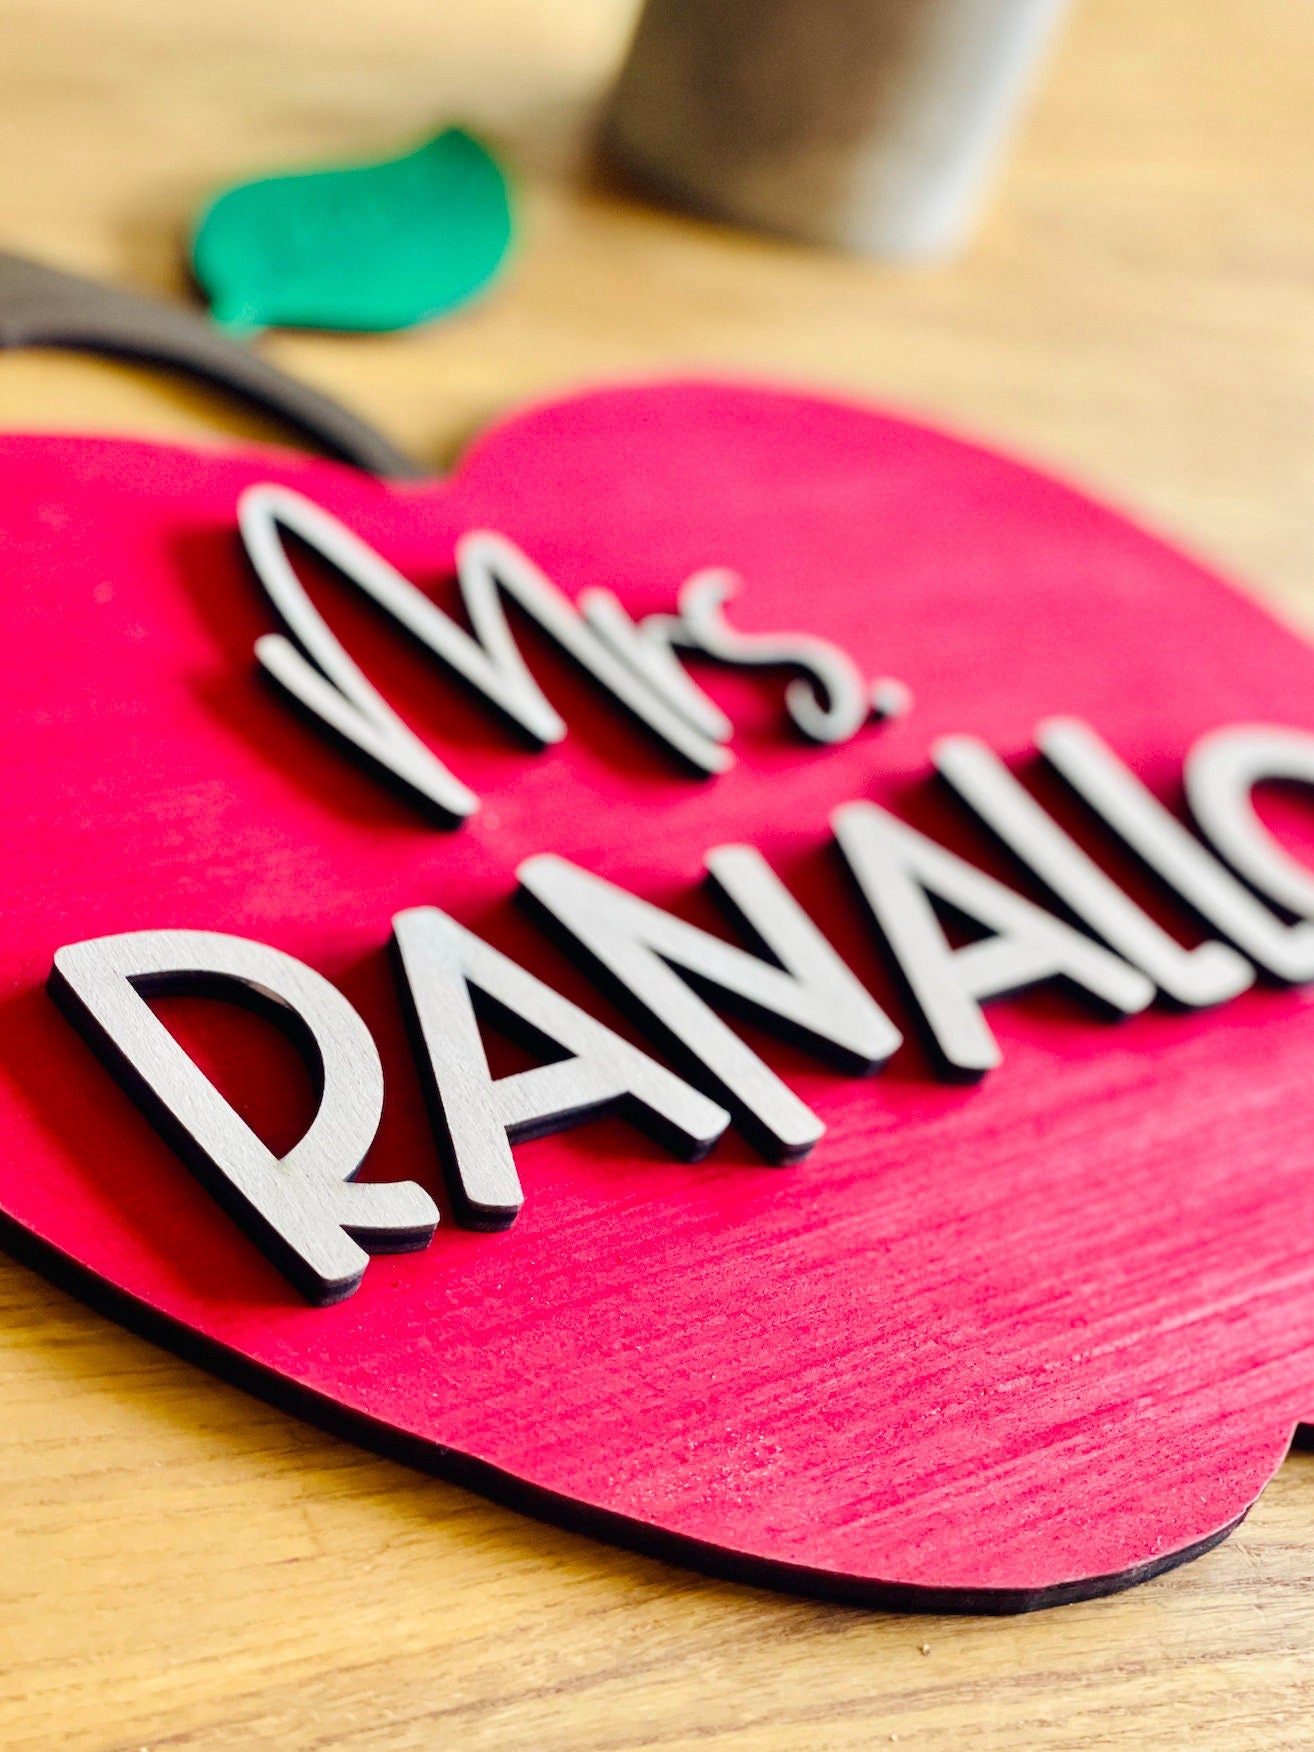 Red Apple Personalized 3D Teacher Name Cut Out Sign